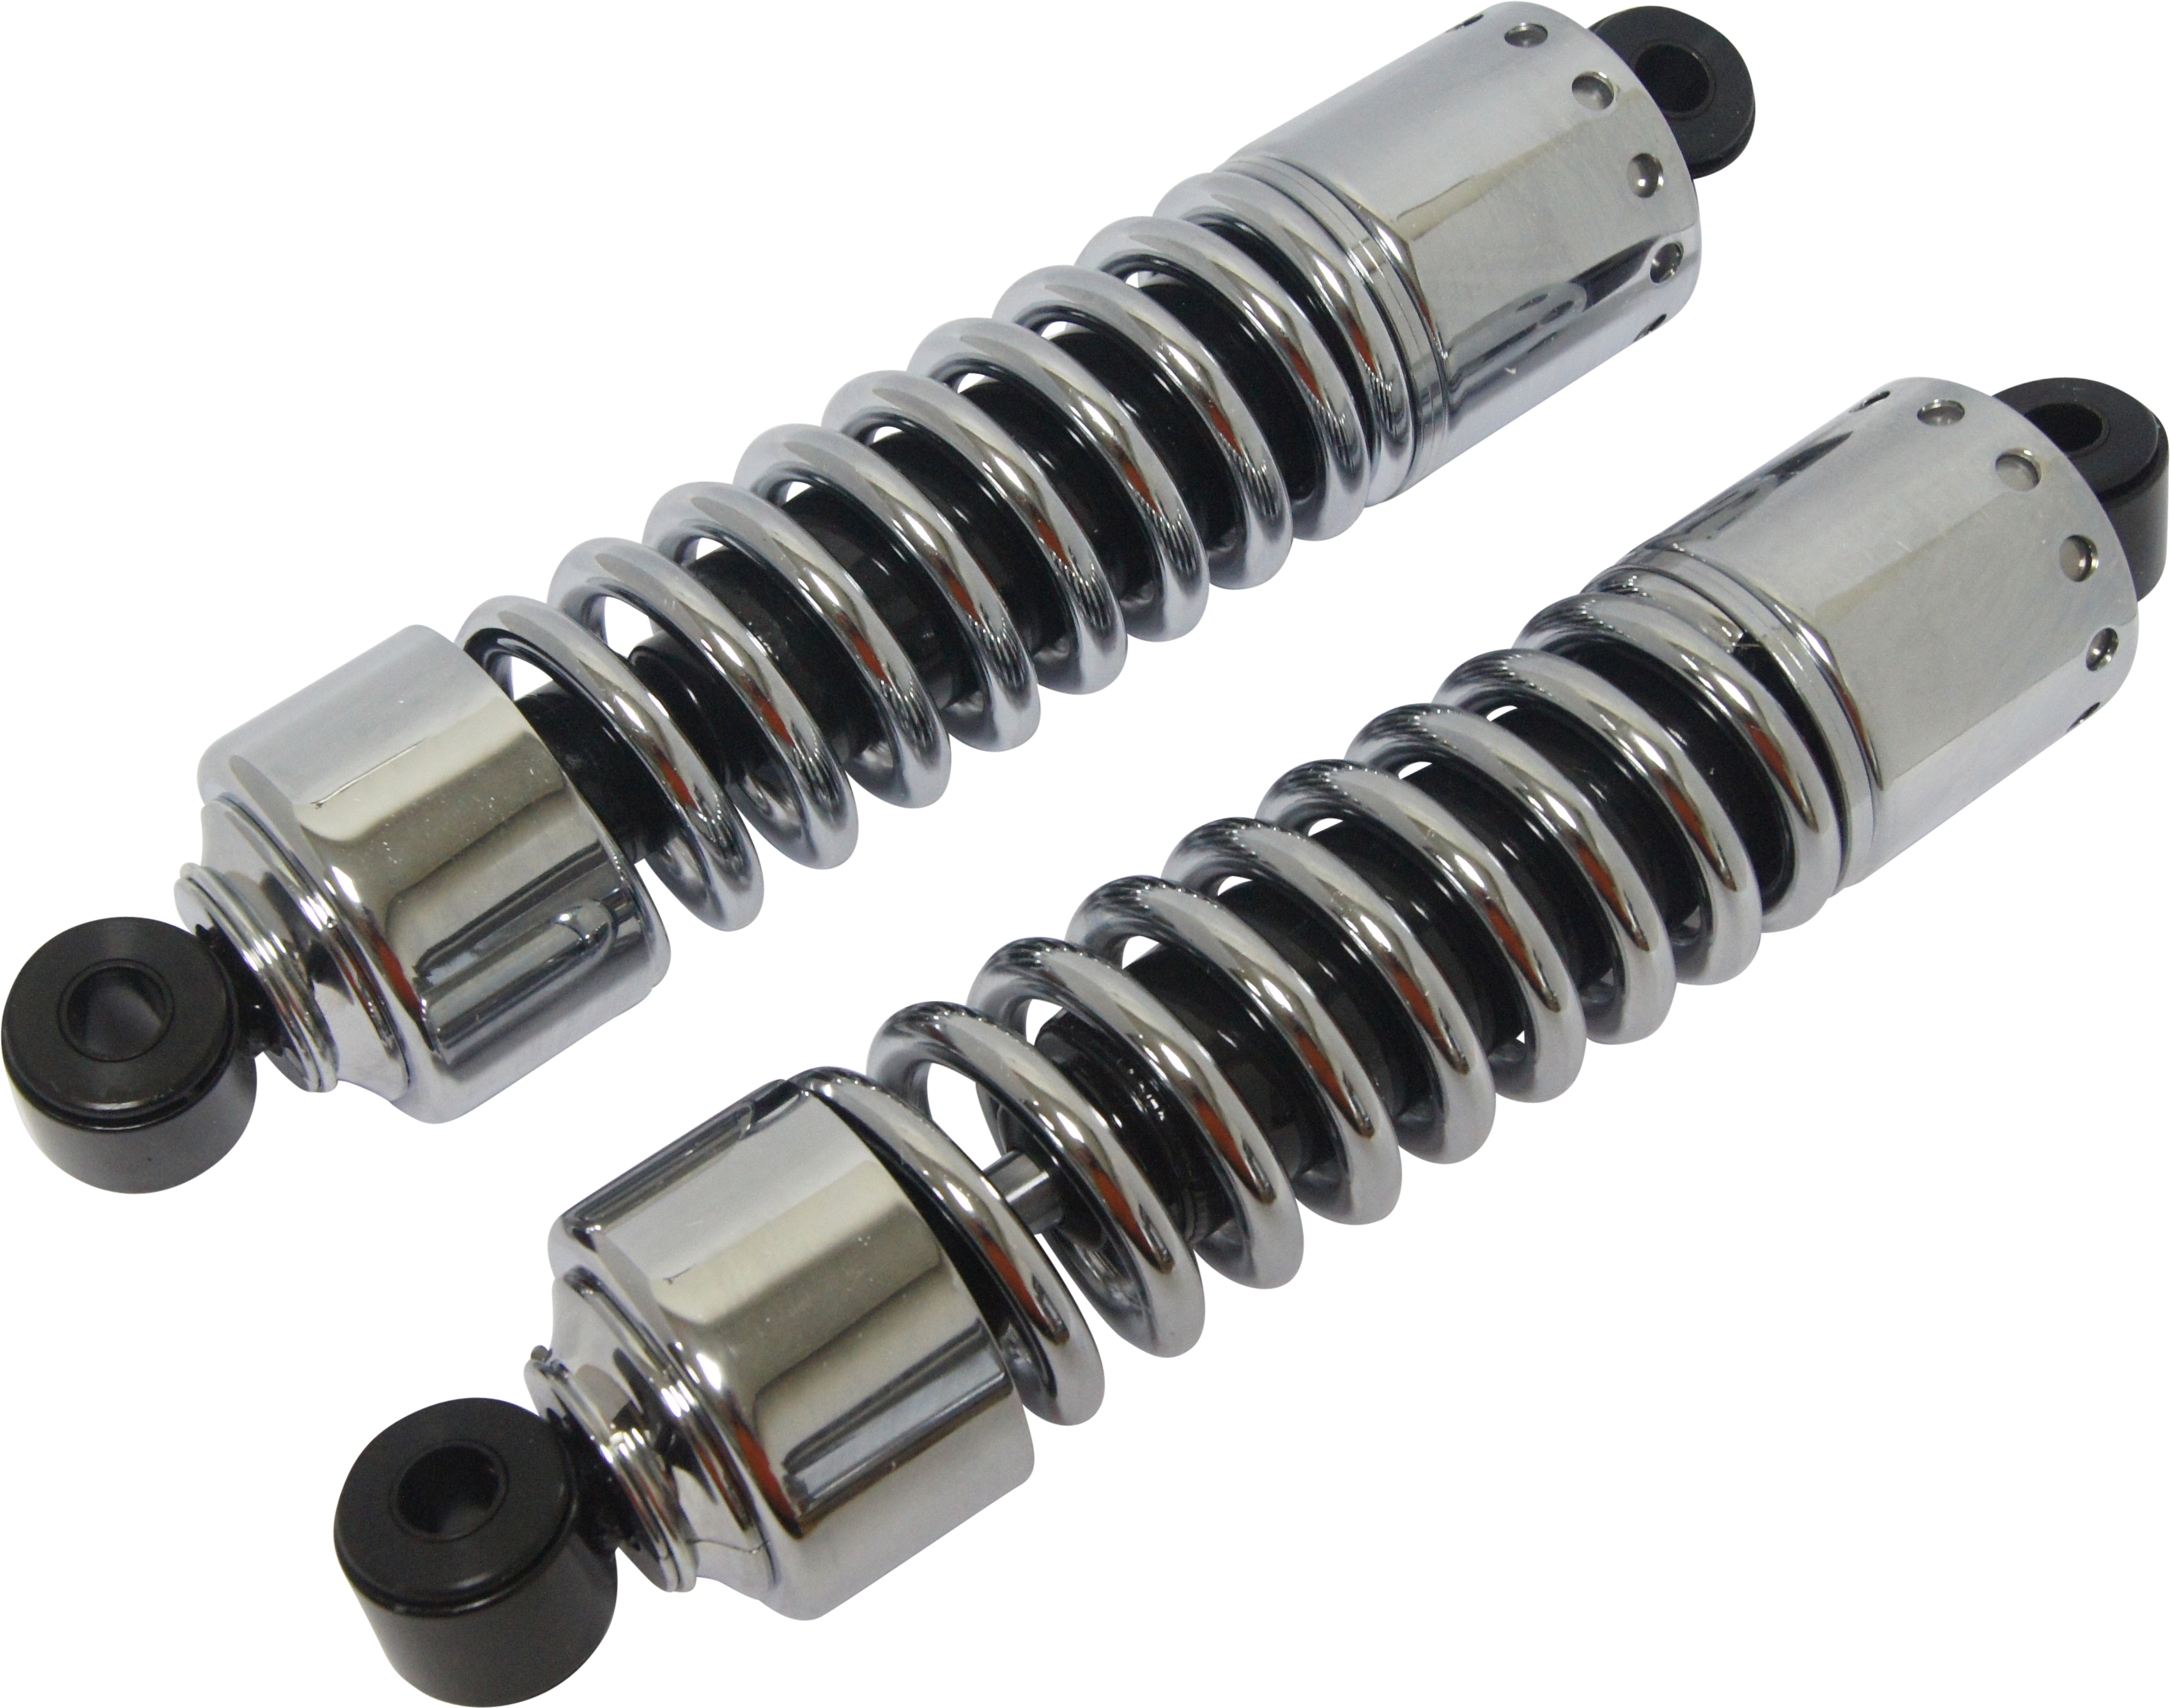 4-Speed Shocks W/Short Cover - Chrome 12" - For 80-86 HD Touring Dyna - Click Image to Close